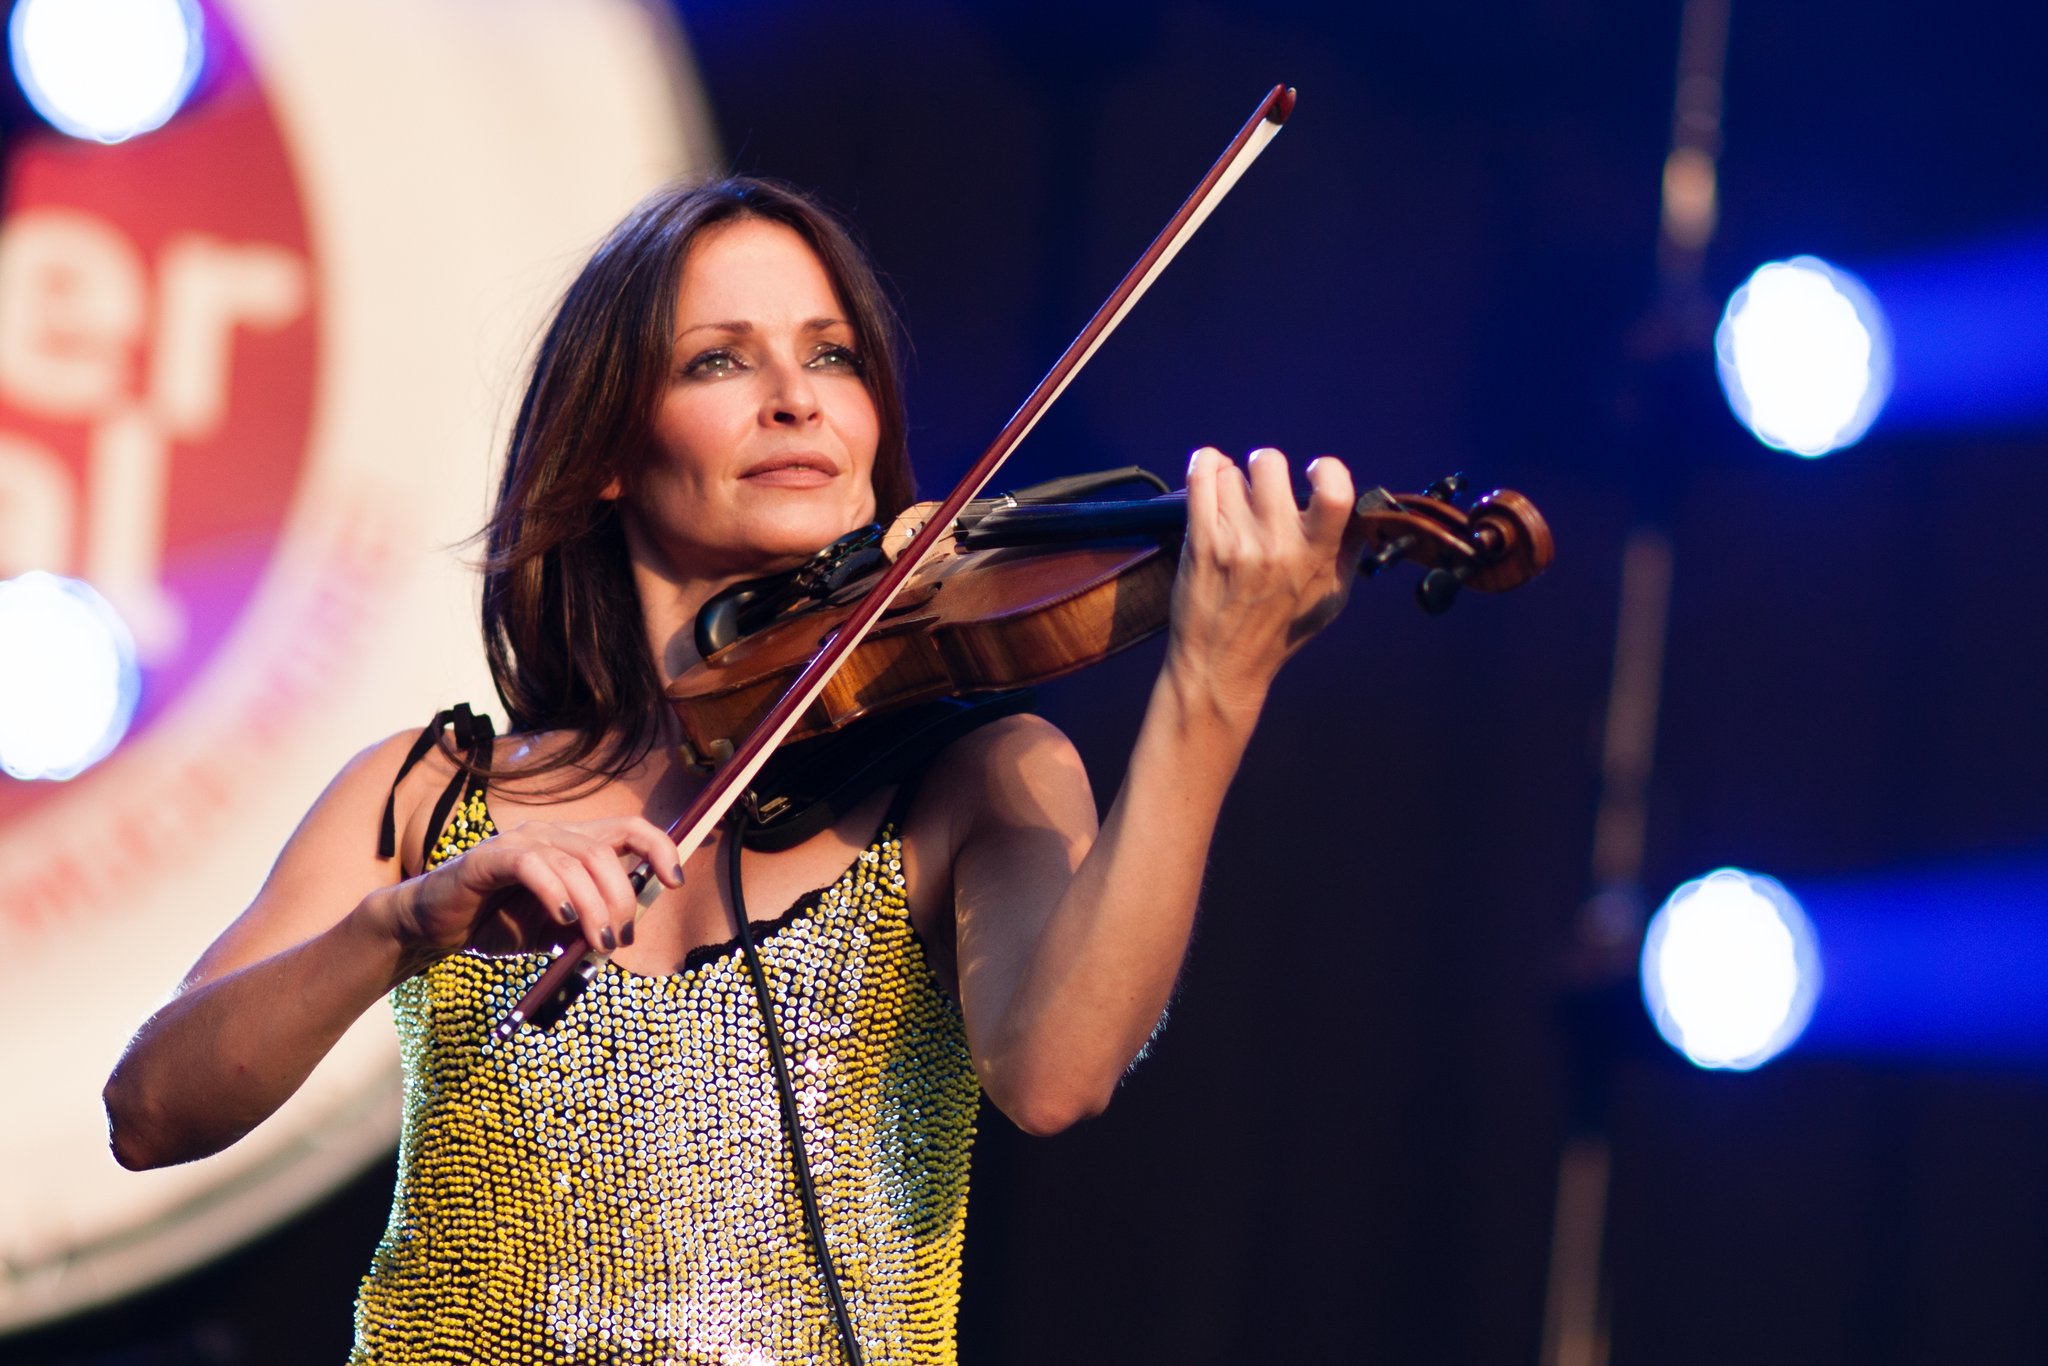 Please join me here at in wishing the one and only Sharon Corr a very Happy Birthday today  